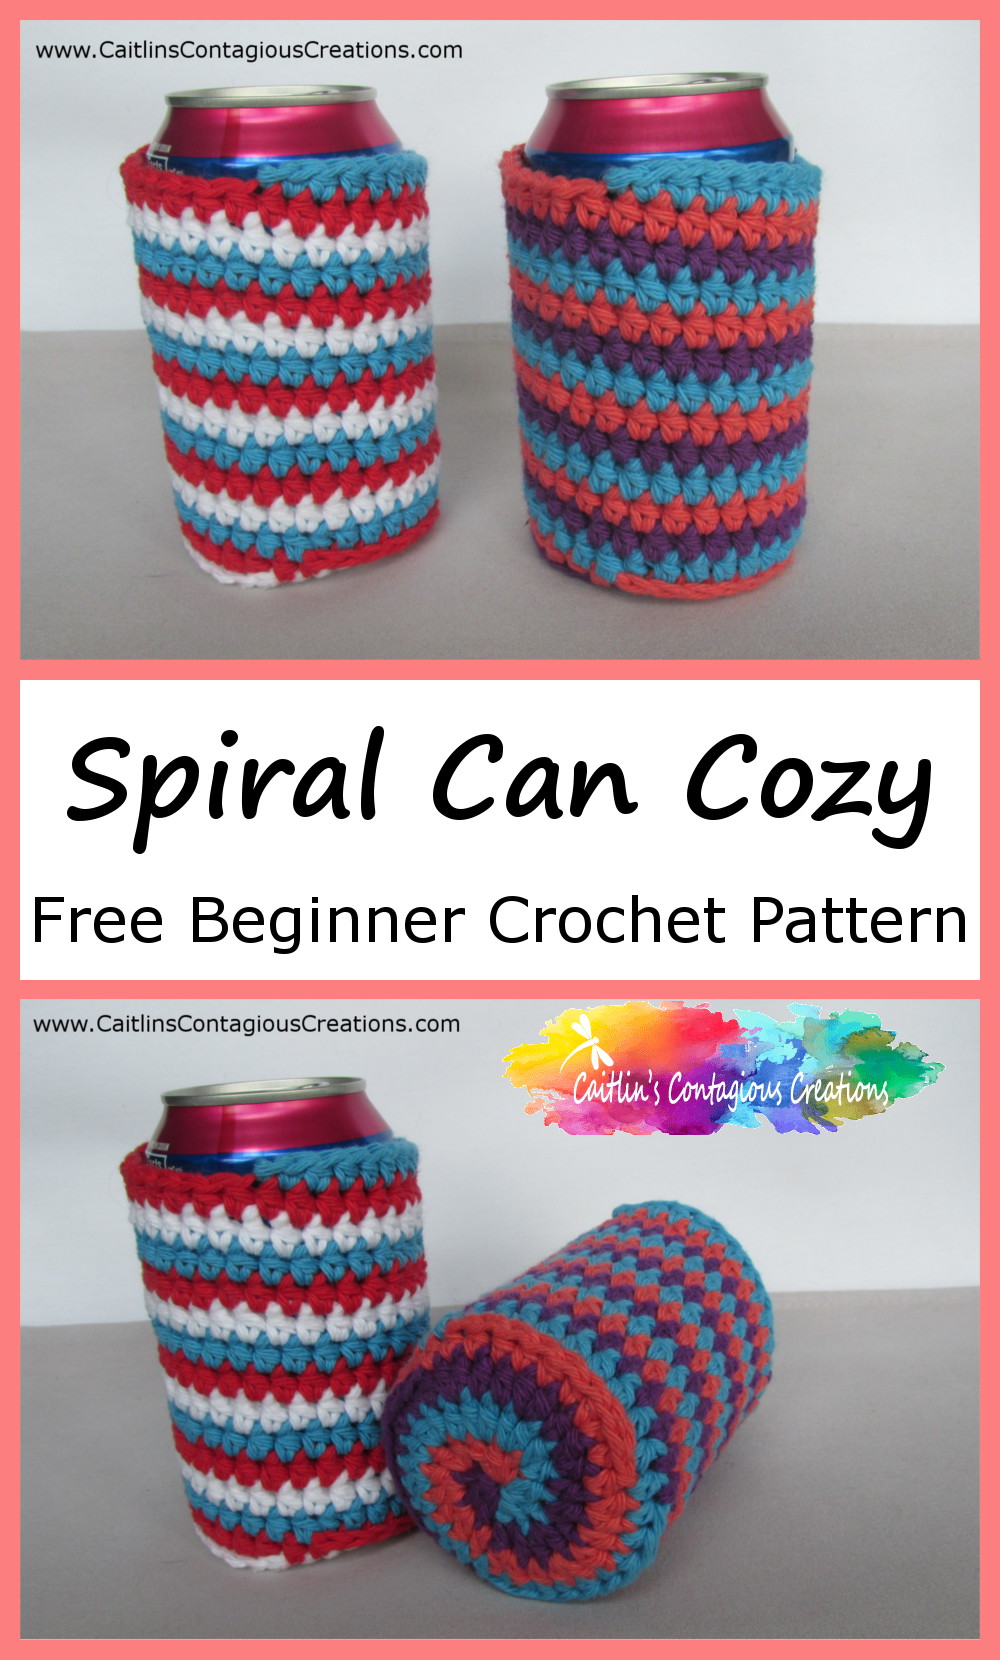 two photos with finished can cozies and text overlay "Spiral Can Cozy Free Beginner Crochet Pattern"